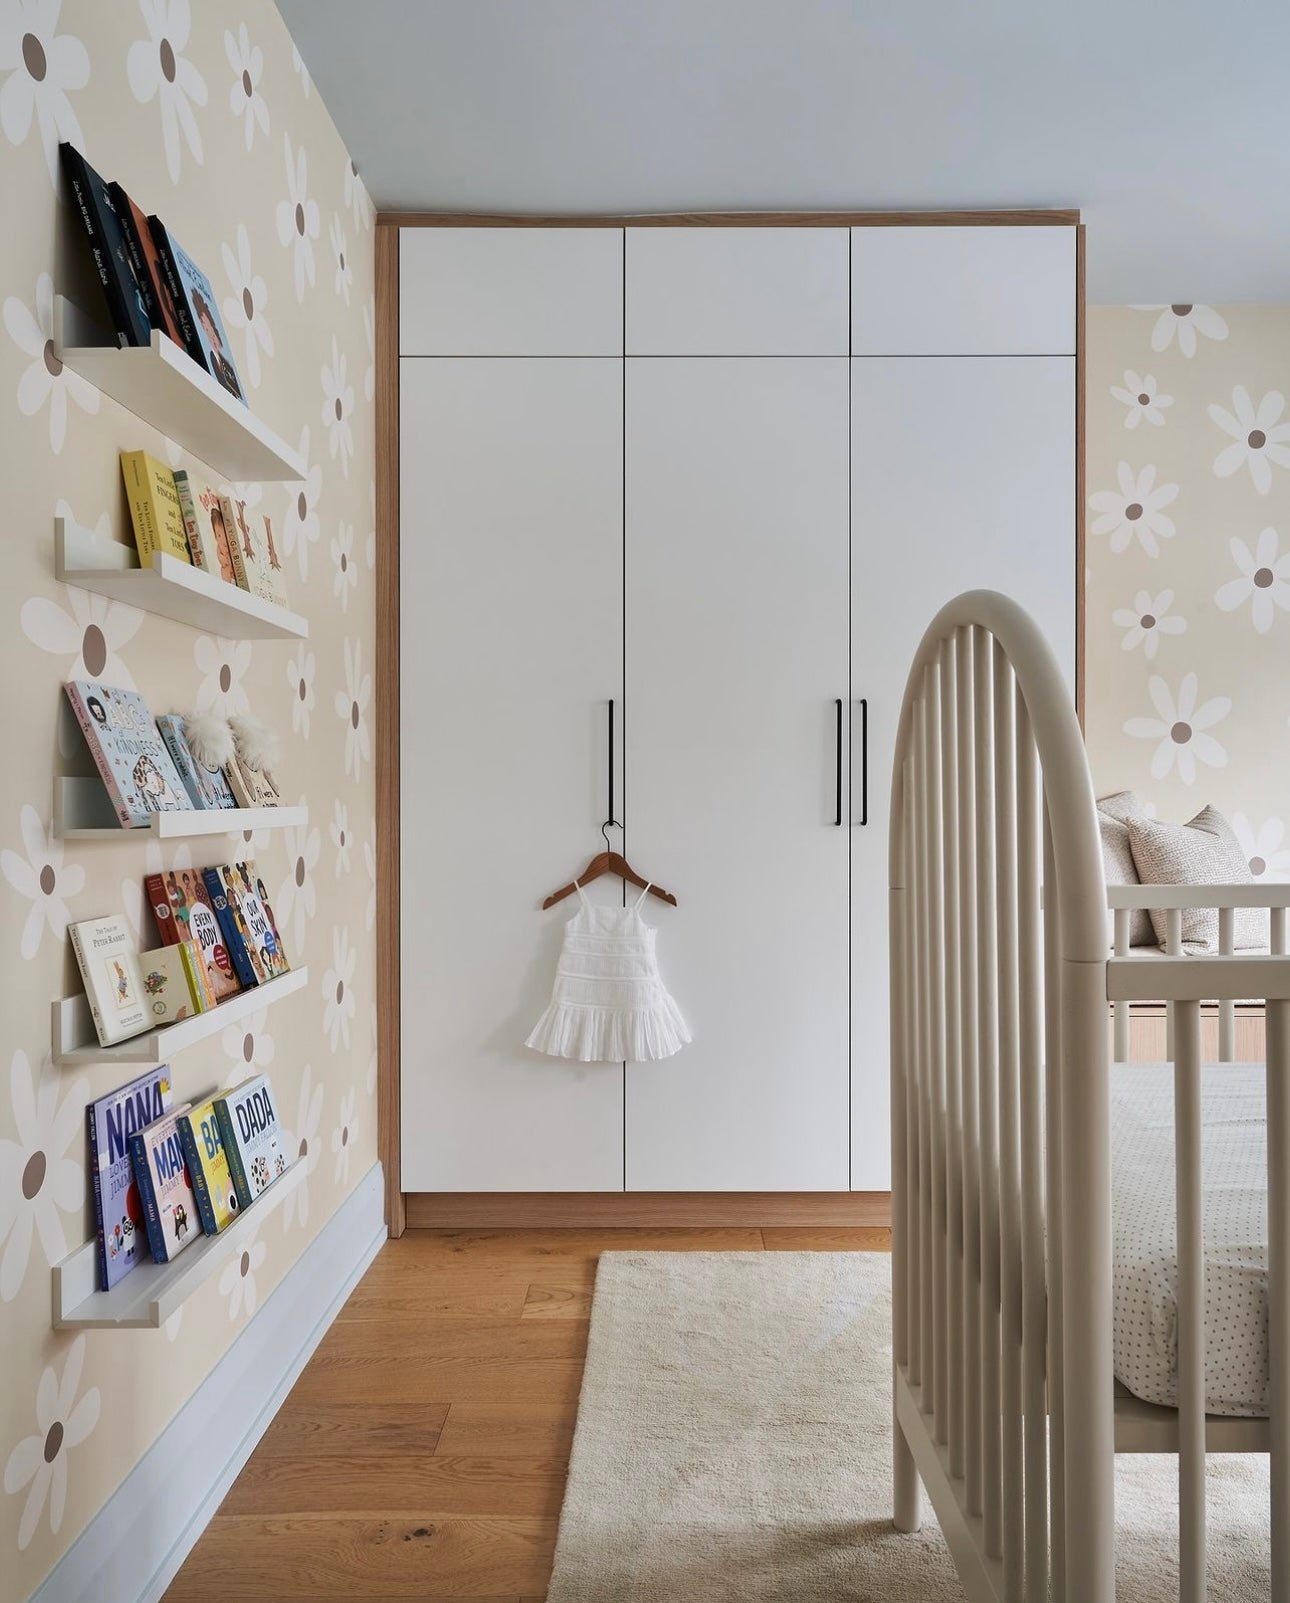 A serene nursery room decorated with Simple Daisy Wallpaper. The walls are adorned with a beige background and white daisies, complementing the minimalist white furniture and shelving filled with children’s books. A small white dress hangs on the closet door, adding a touch of sweetness to the room.